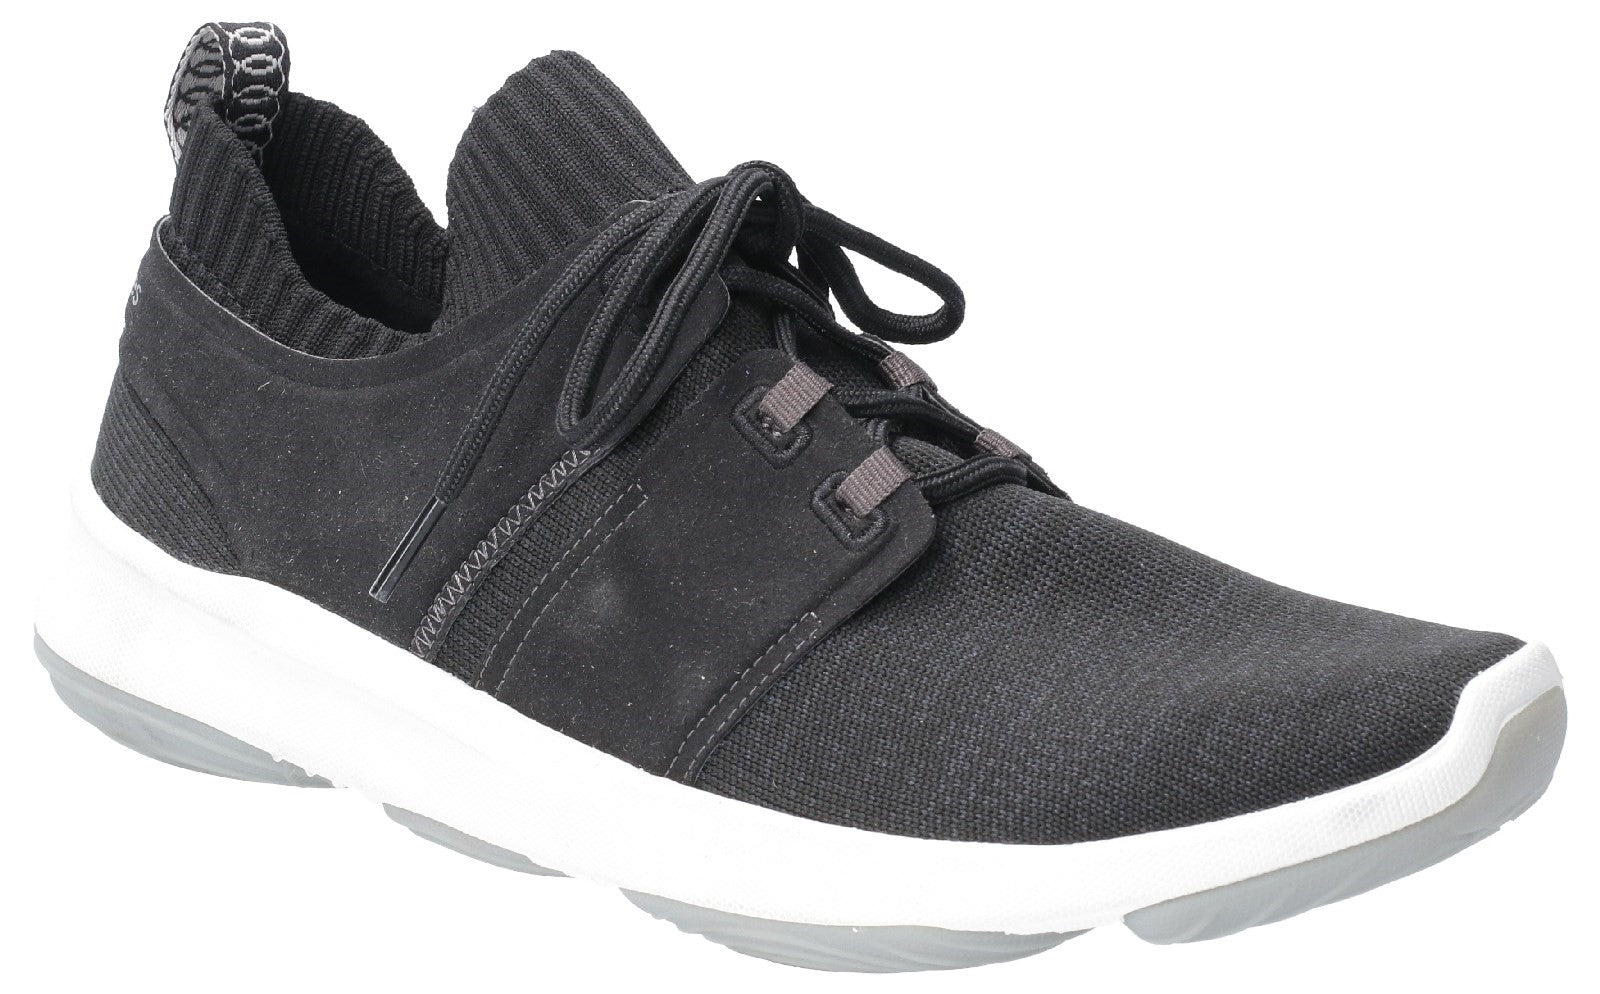 Hush Puppies World BounceMax black men's lace up trainer